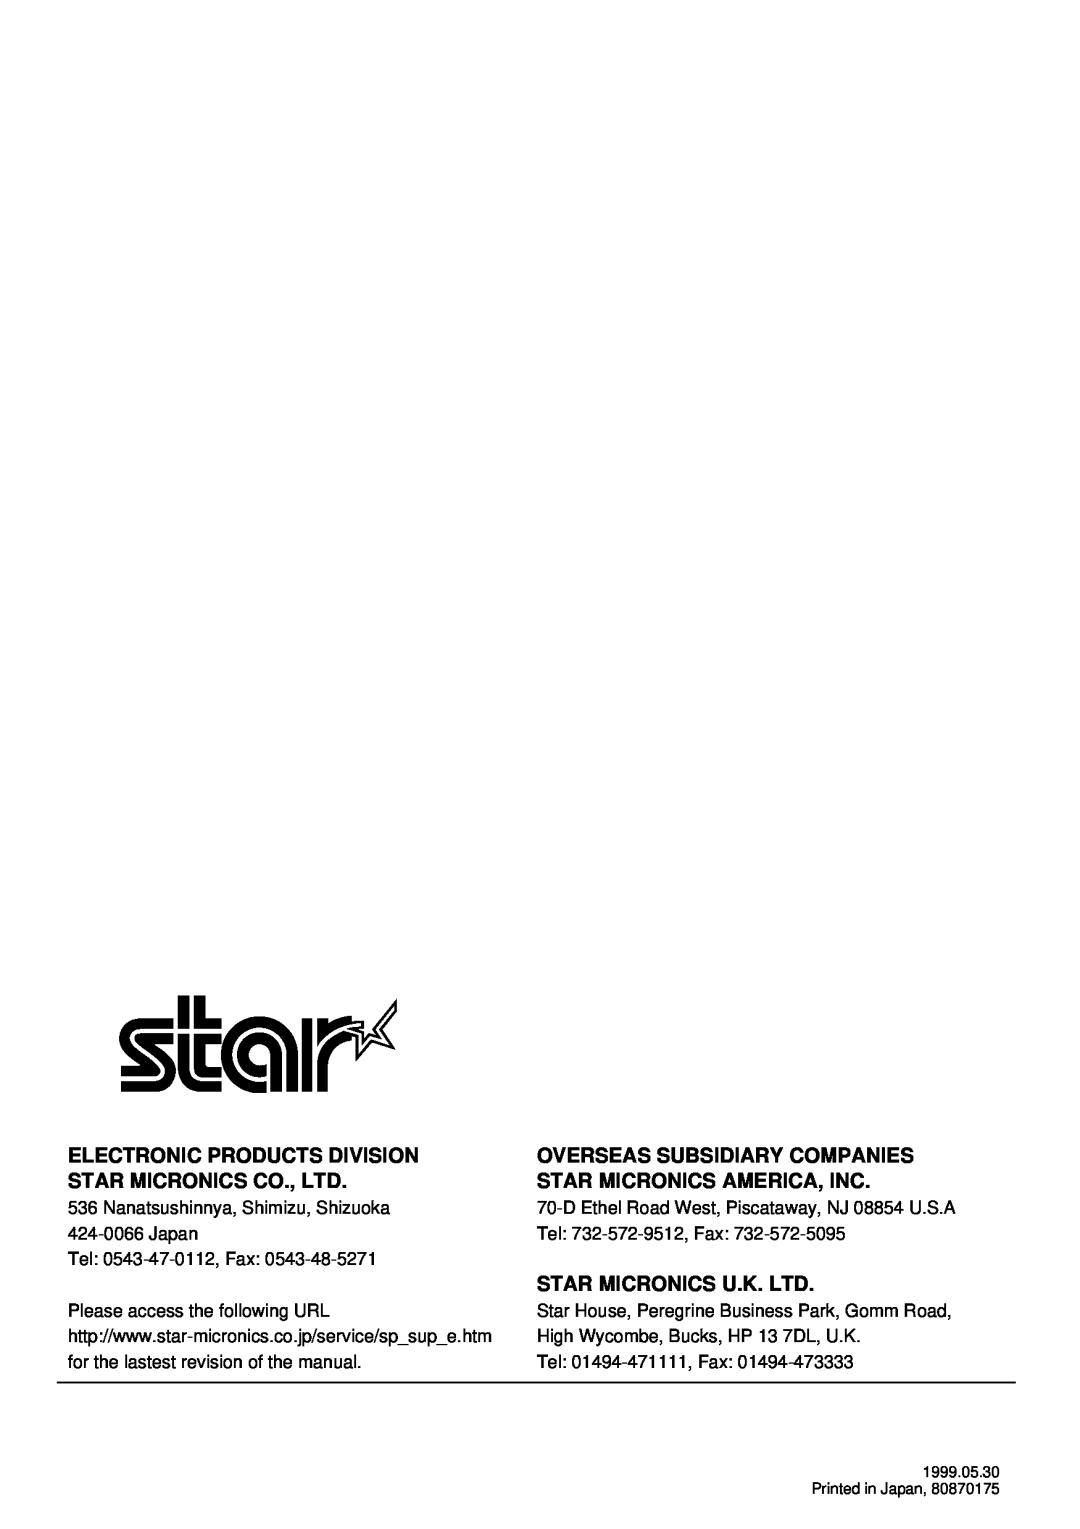 Star Micronics DP8340 user manual Electronic Products Division, Overseas Subsidiary Companies, Star Micronics America, Inc 